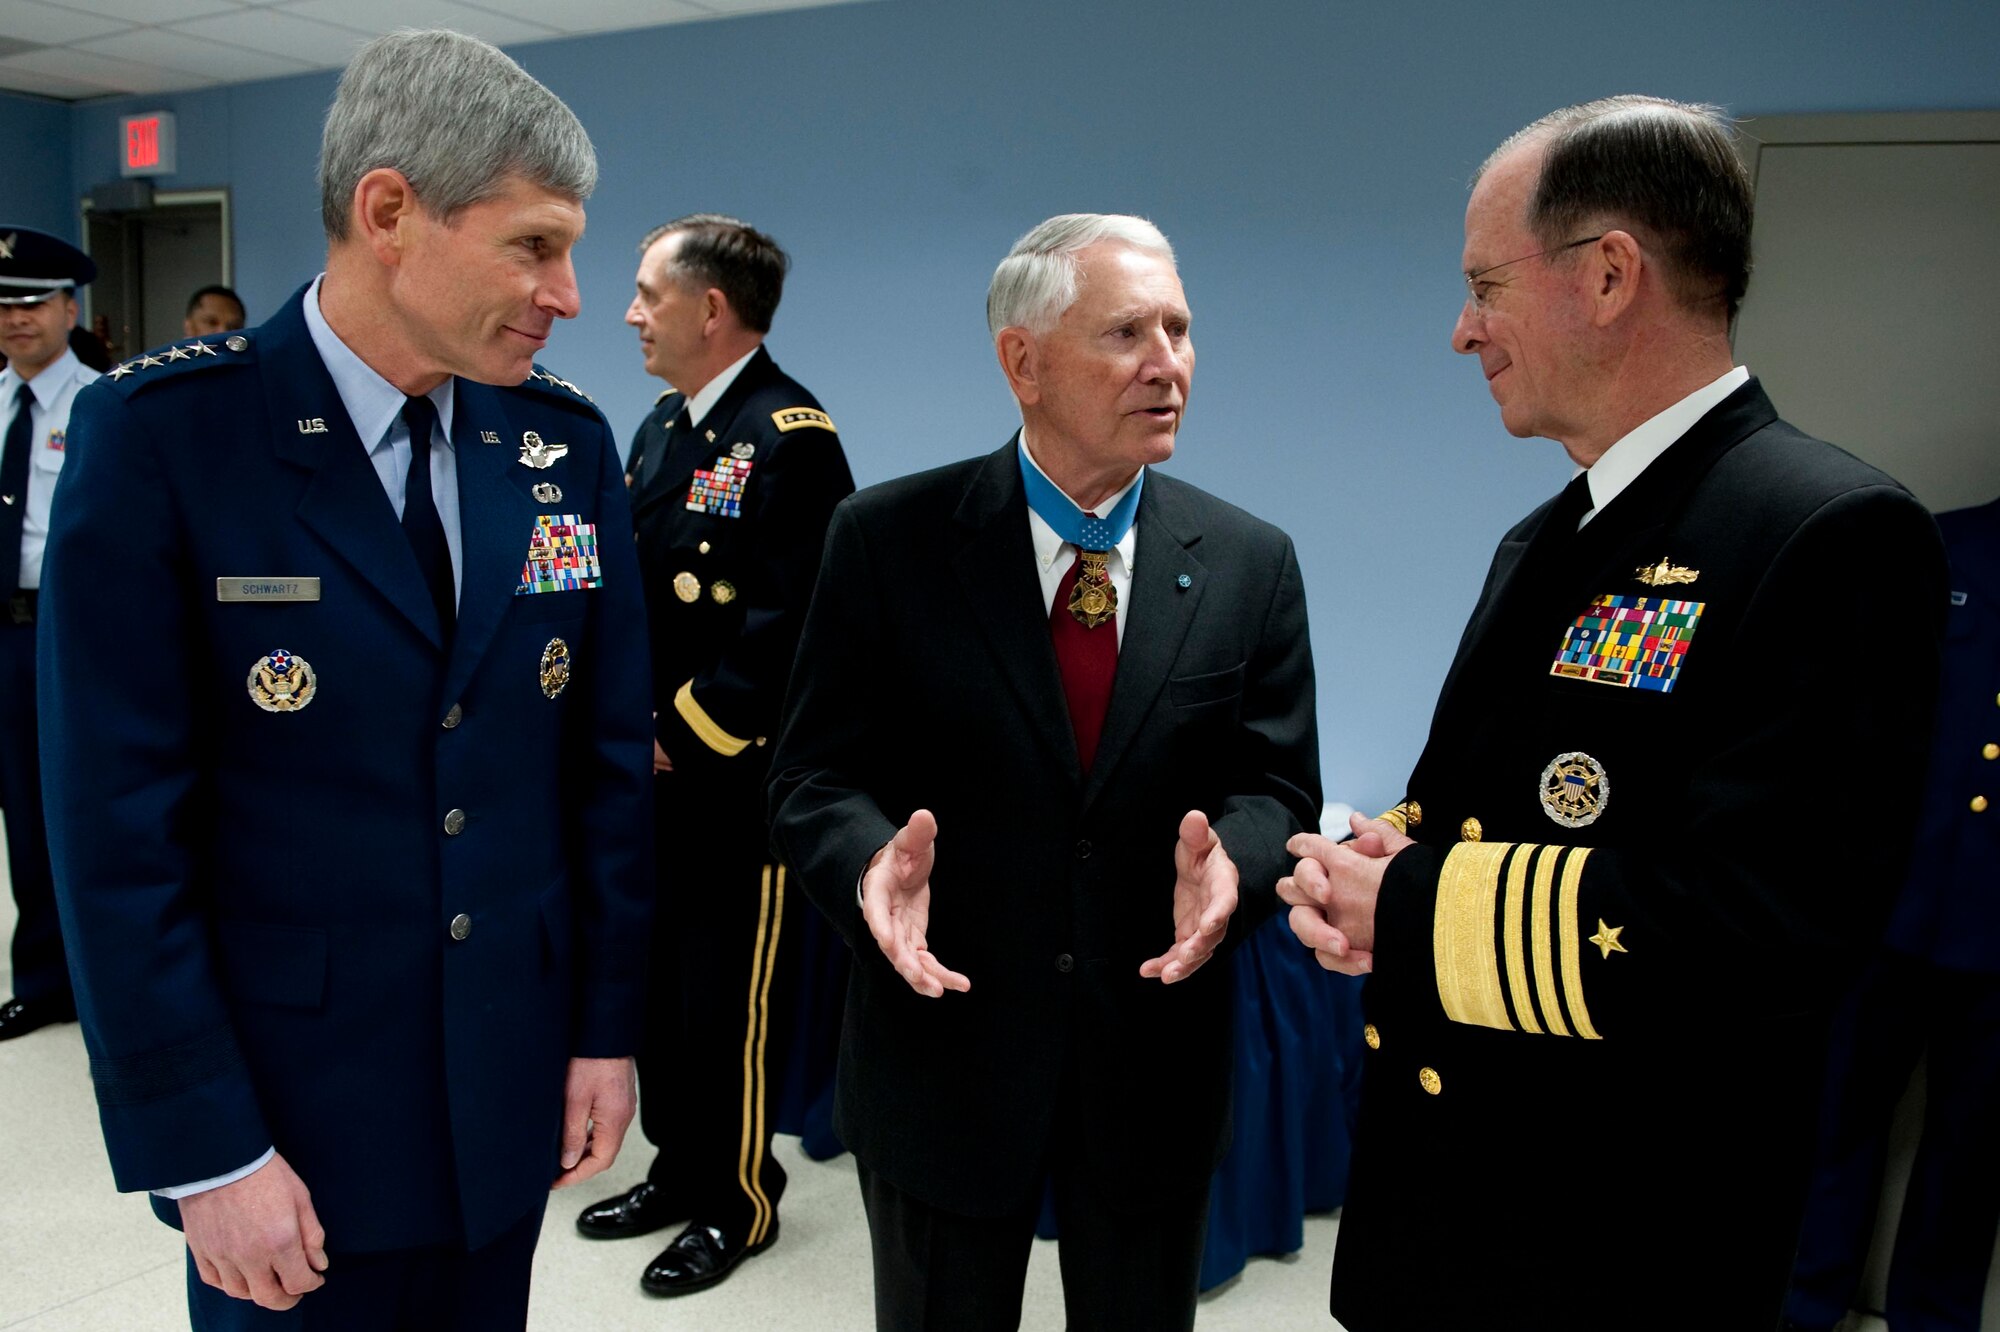 Retired Col. Leo K. Thorsness, president of the Congressional Medal of Honor Society, speaks with Air Force Chief of Staff Gen. Norton Schwartz and U.S. Navy Adm. Mike Mullen, chairman of the Joint Chiefs of Staff, March 25, 2011, prior to a ceremony honoring the 150th anniversary of the Medal of Honor in the Hall of Heroes at the Pentagon in Washington, D.C. (Department of Defense photo/Petty Officer 1st Class Chad J. McNeeley)